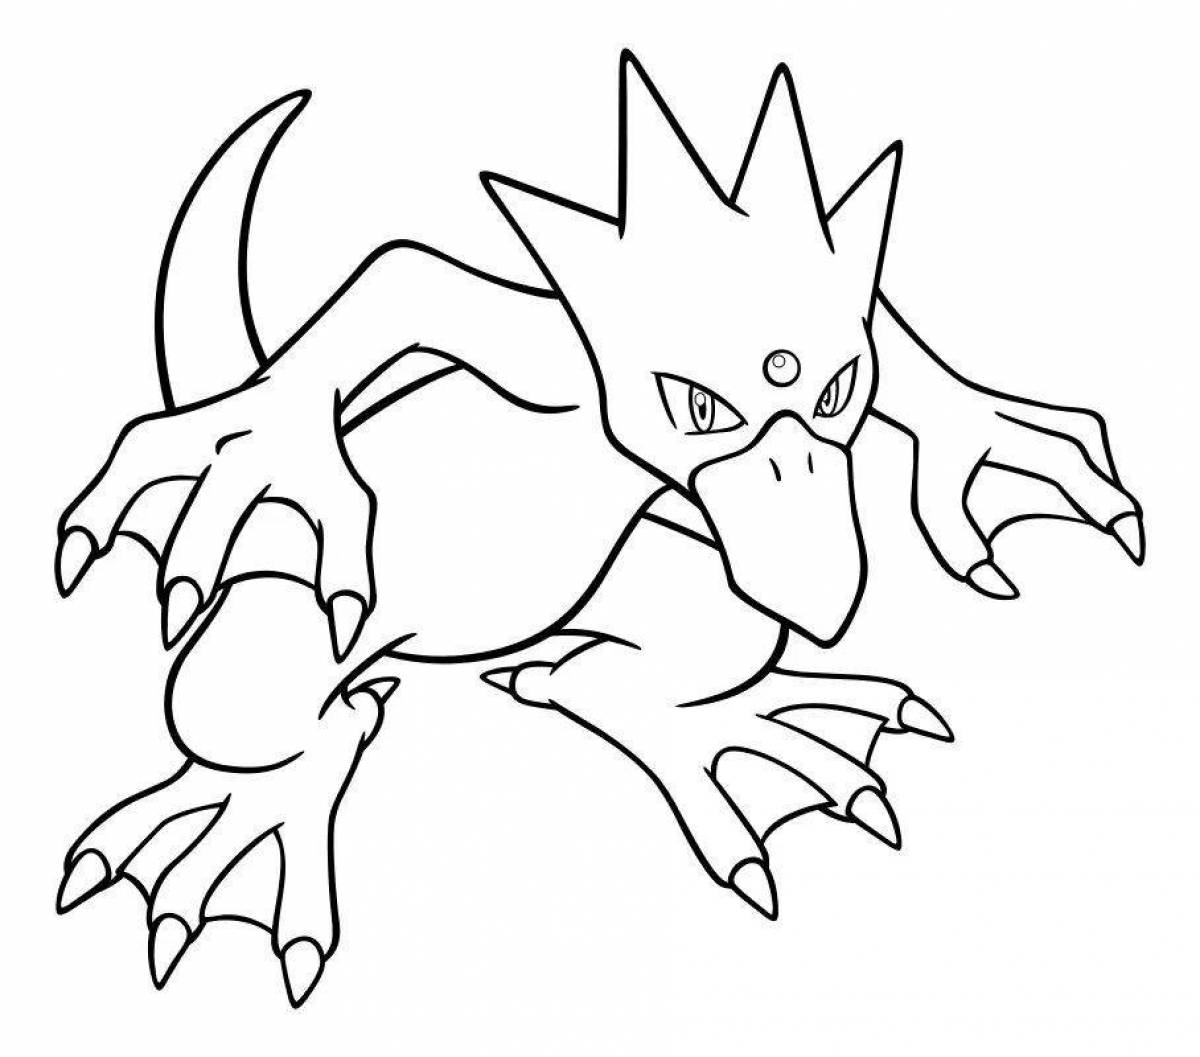 Intriguing Pokemon coloring book